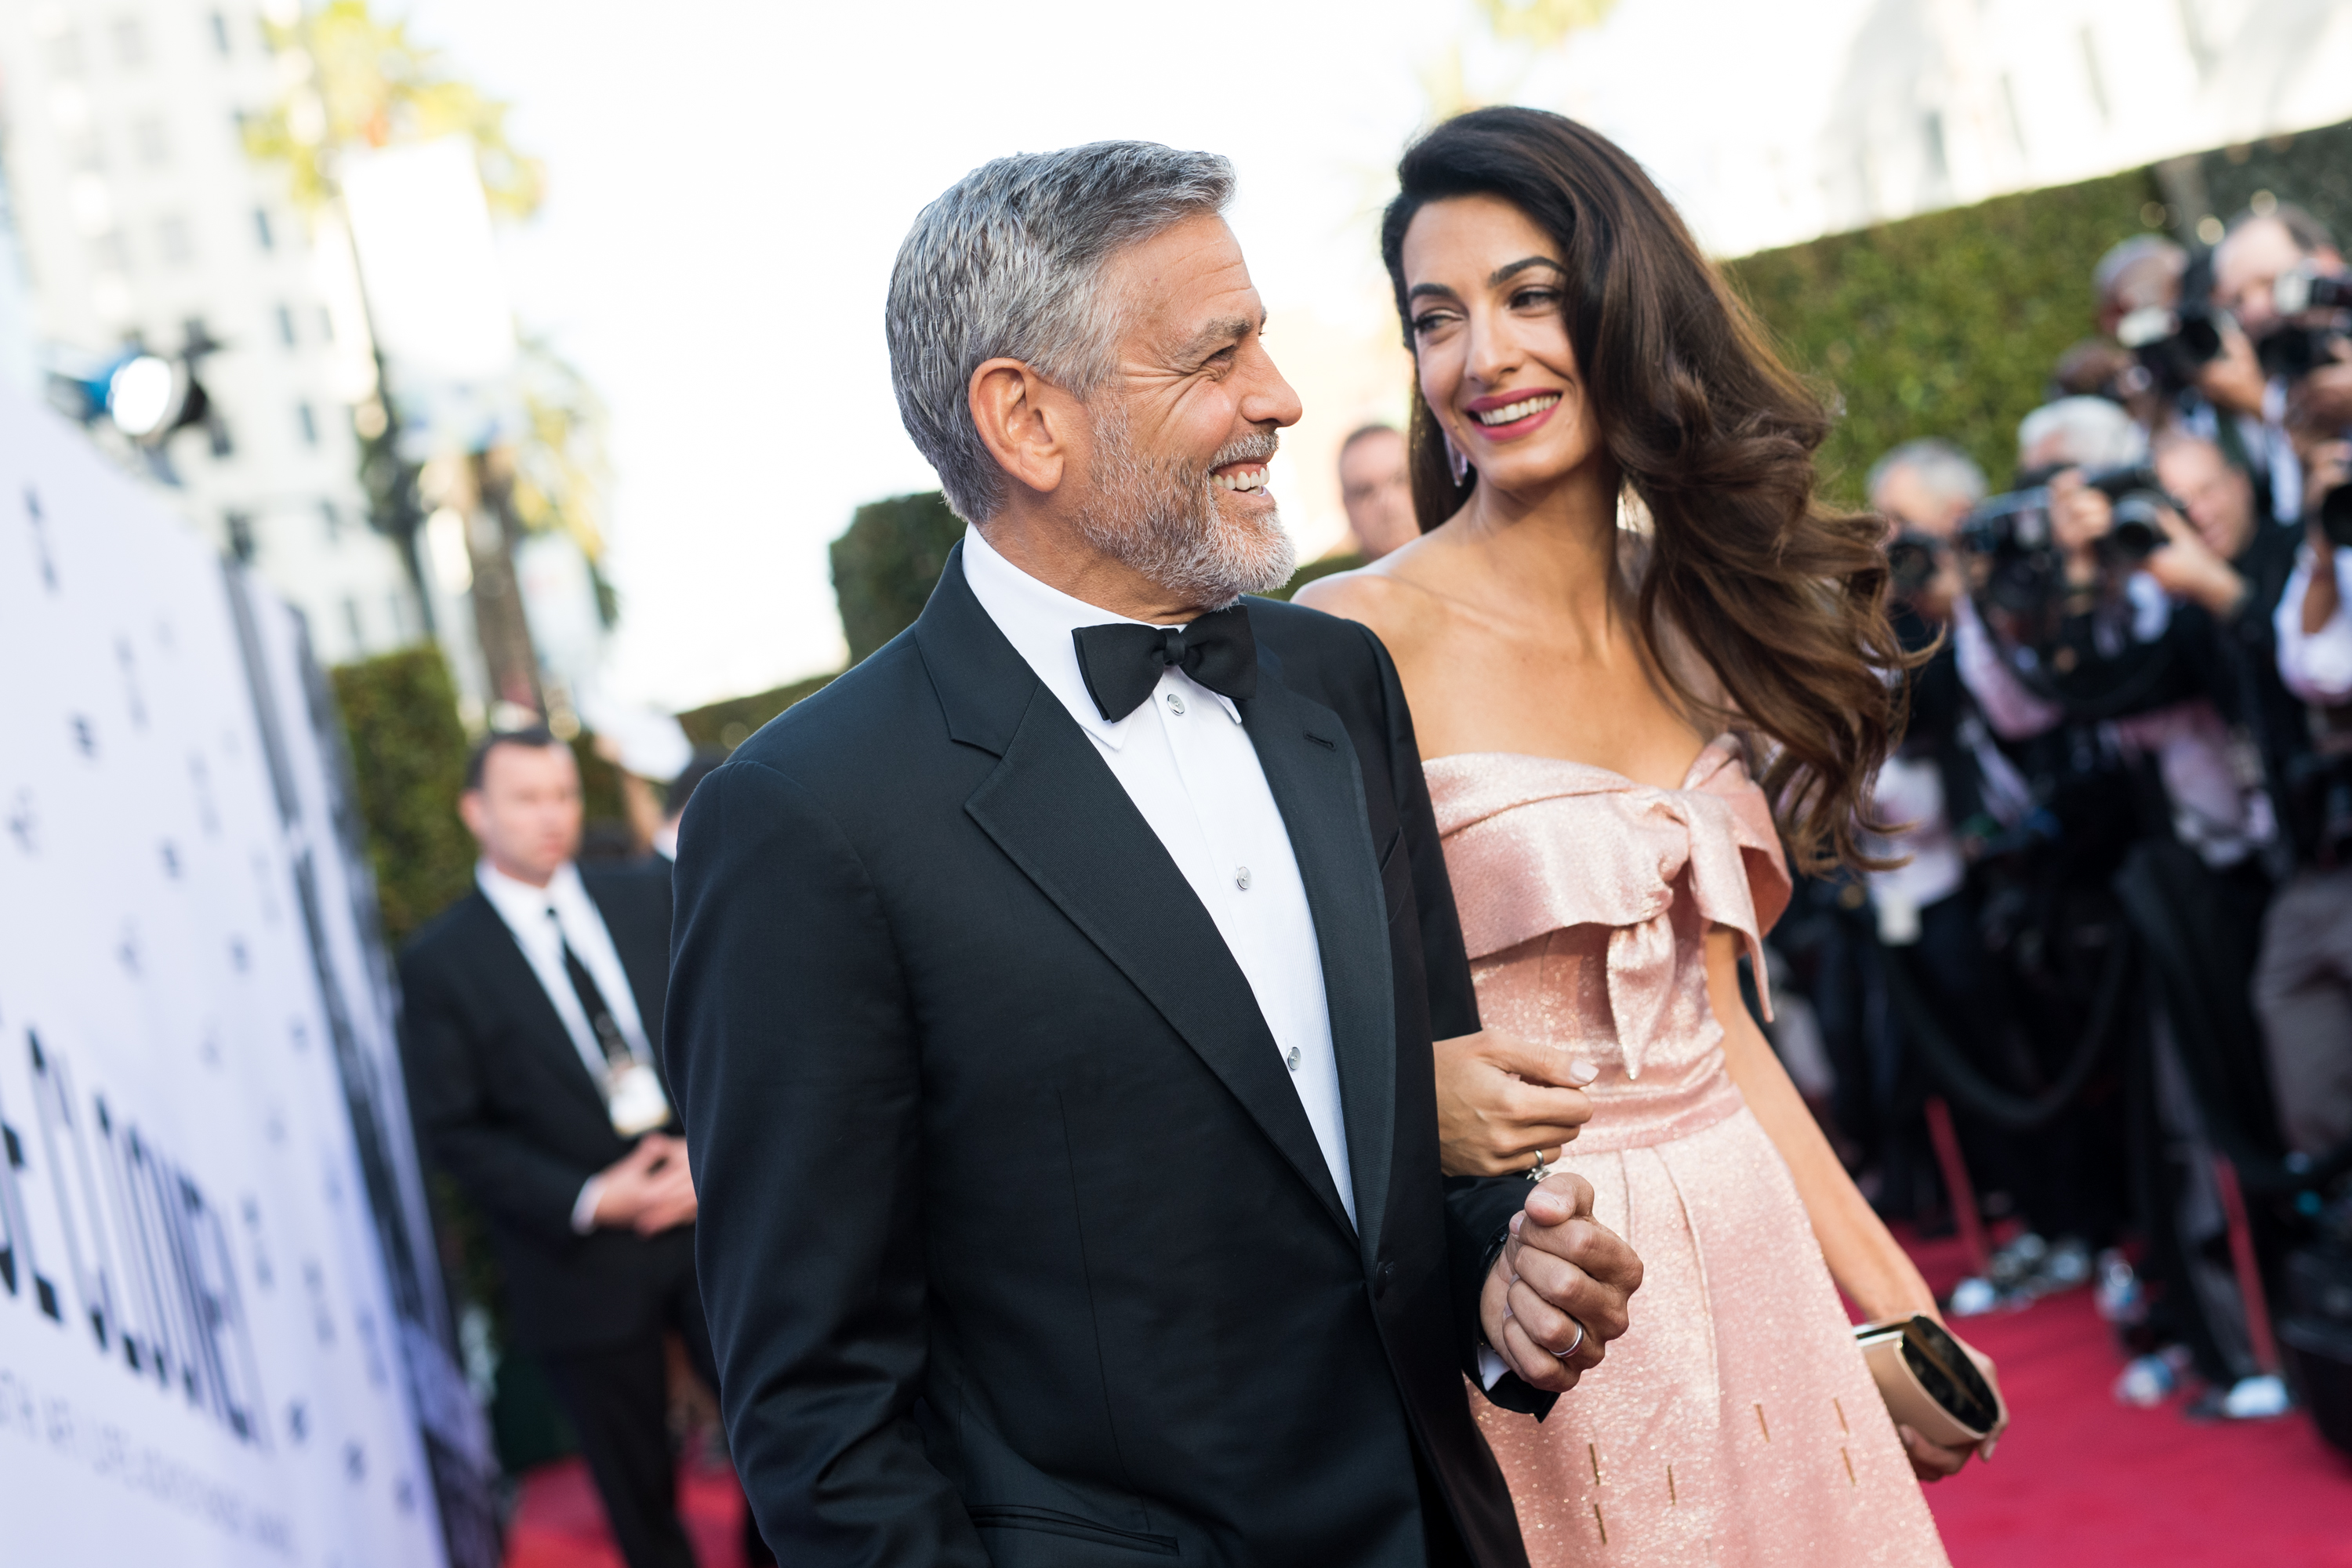 Amal Clooney and George Clooney during the American Film Institute's 46th Life Achievement Award Gala Tribute to George Clooney at Dolby Theatre on June 7, 2018, in Hollywood, California. | Source: Getty Images